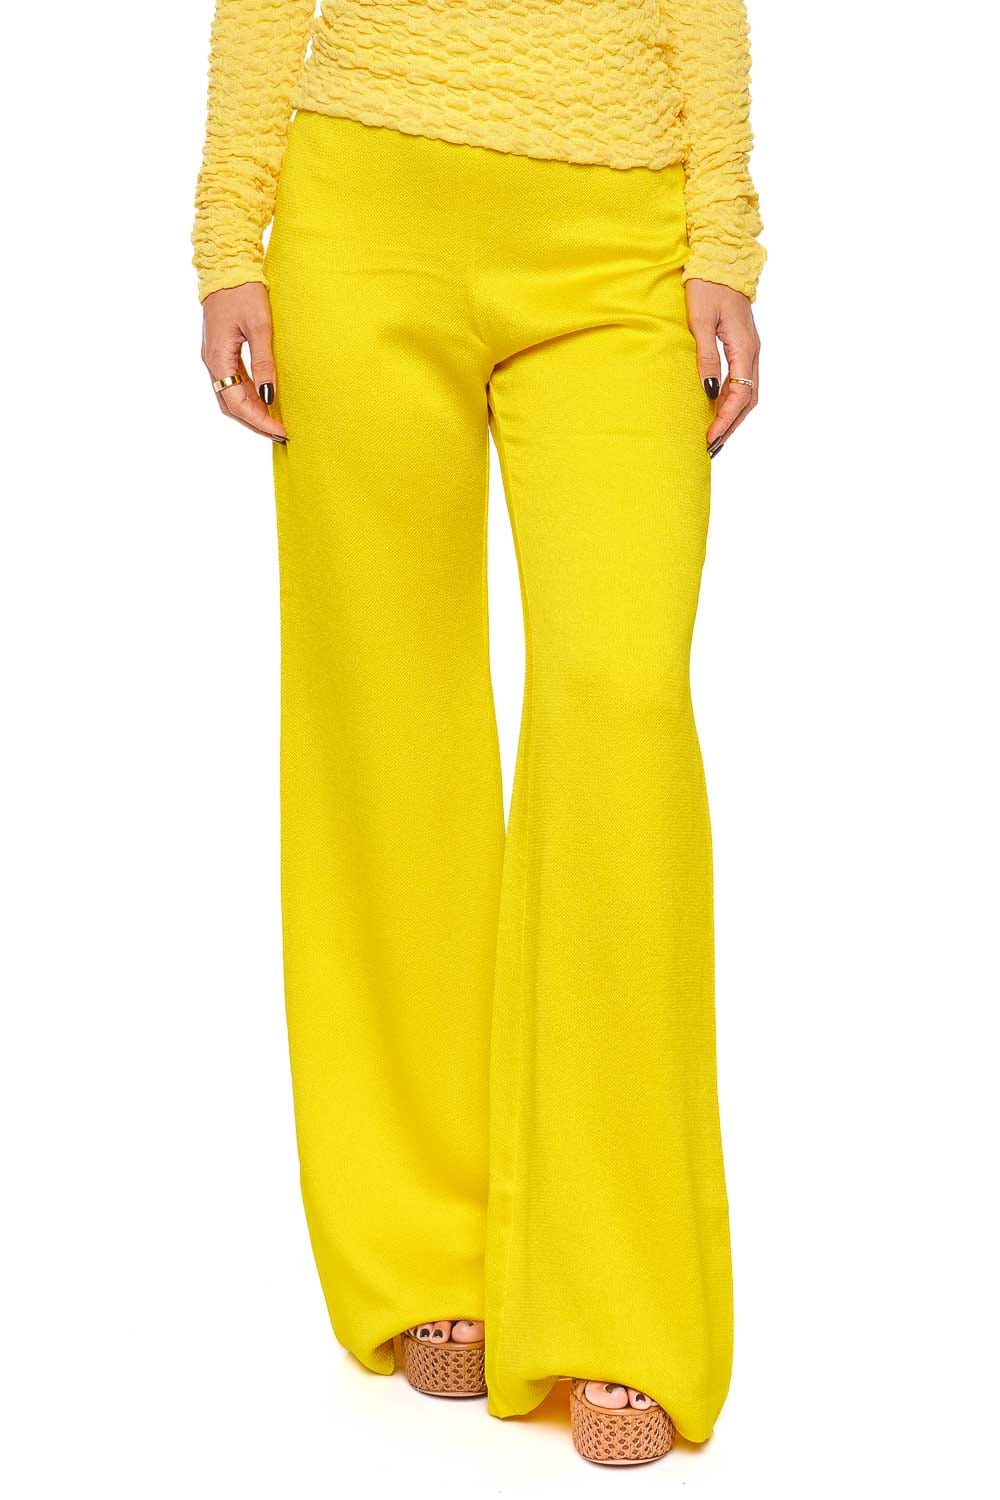 All The Views Flare Pants - Neon Yellow